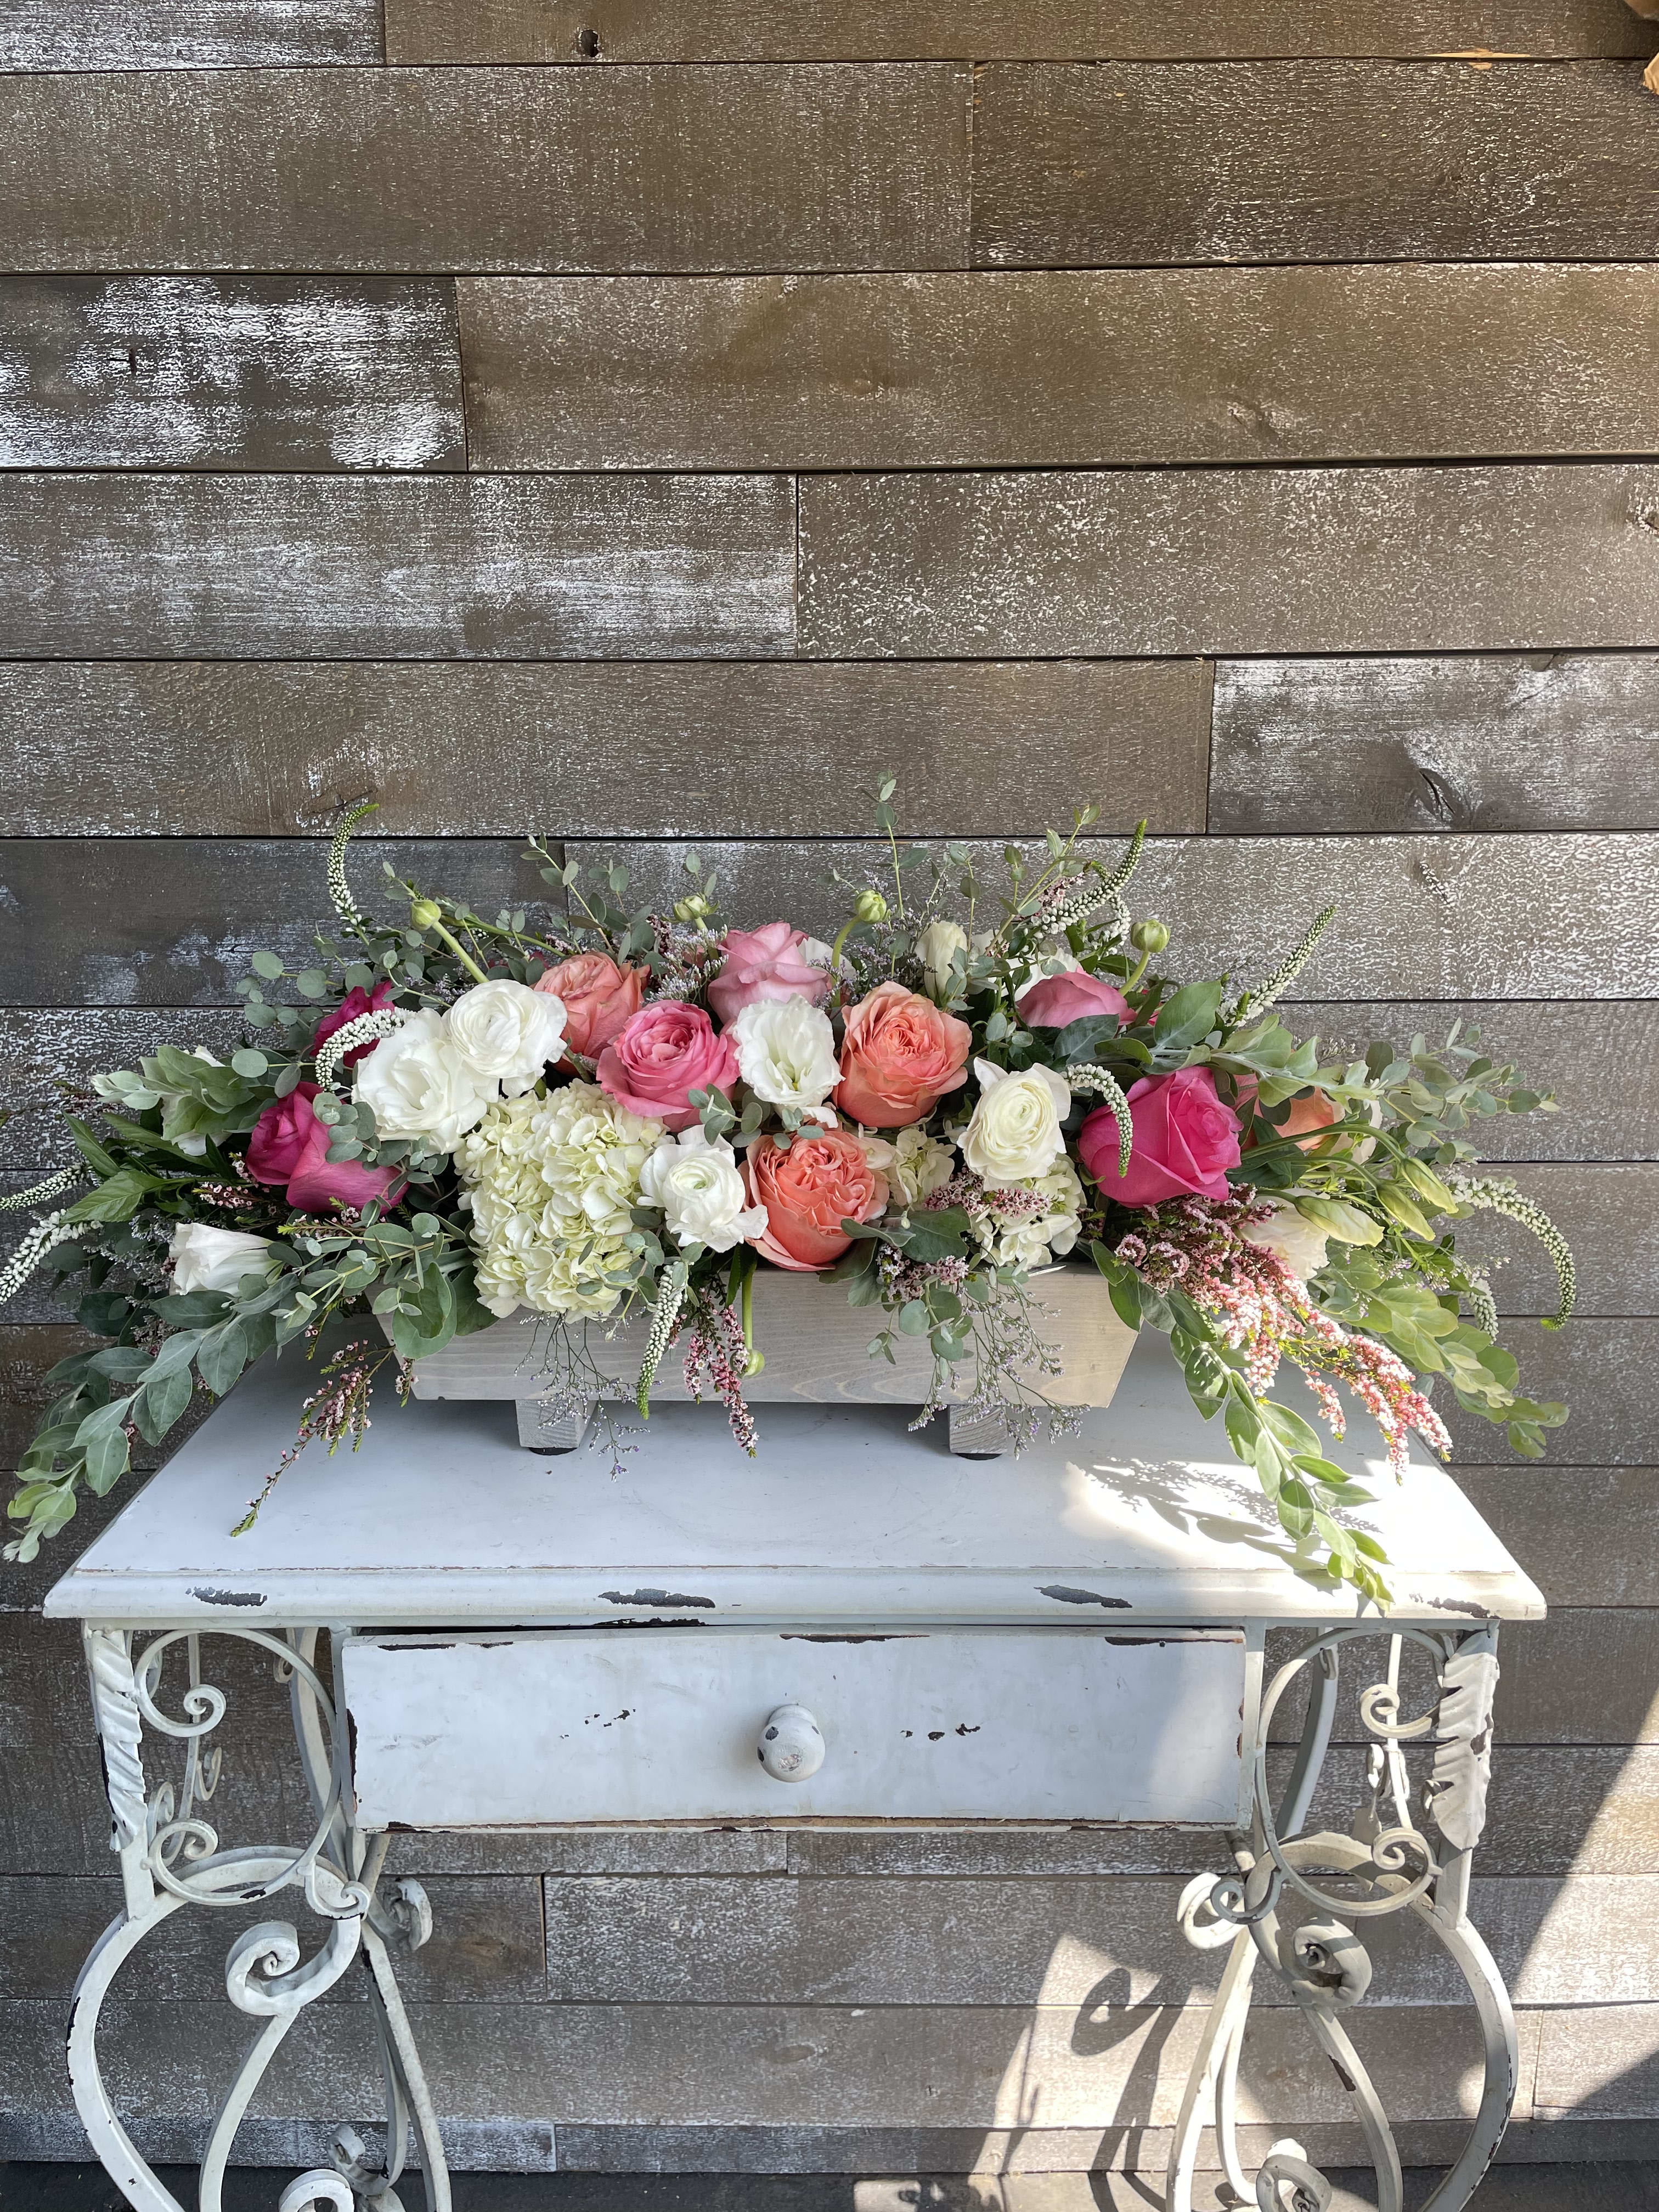 The Michelle  - This arrangement can only be classified as a perfect garden using only the finest farm to table garden florals